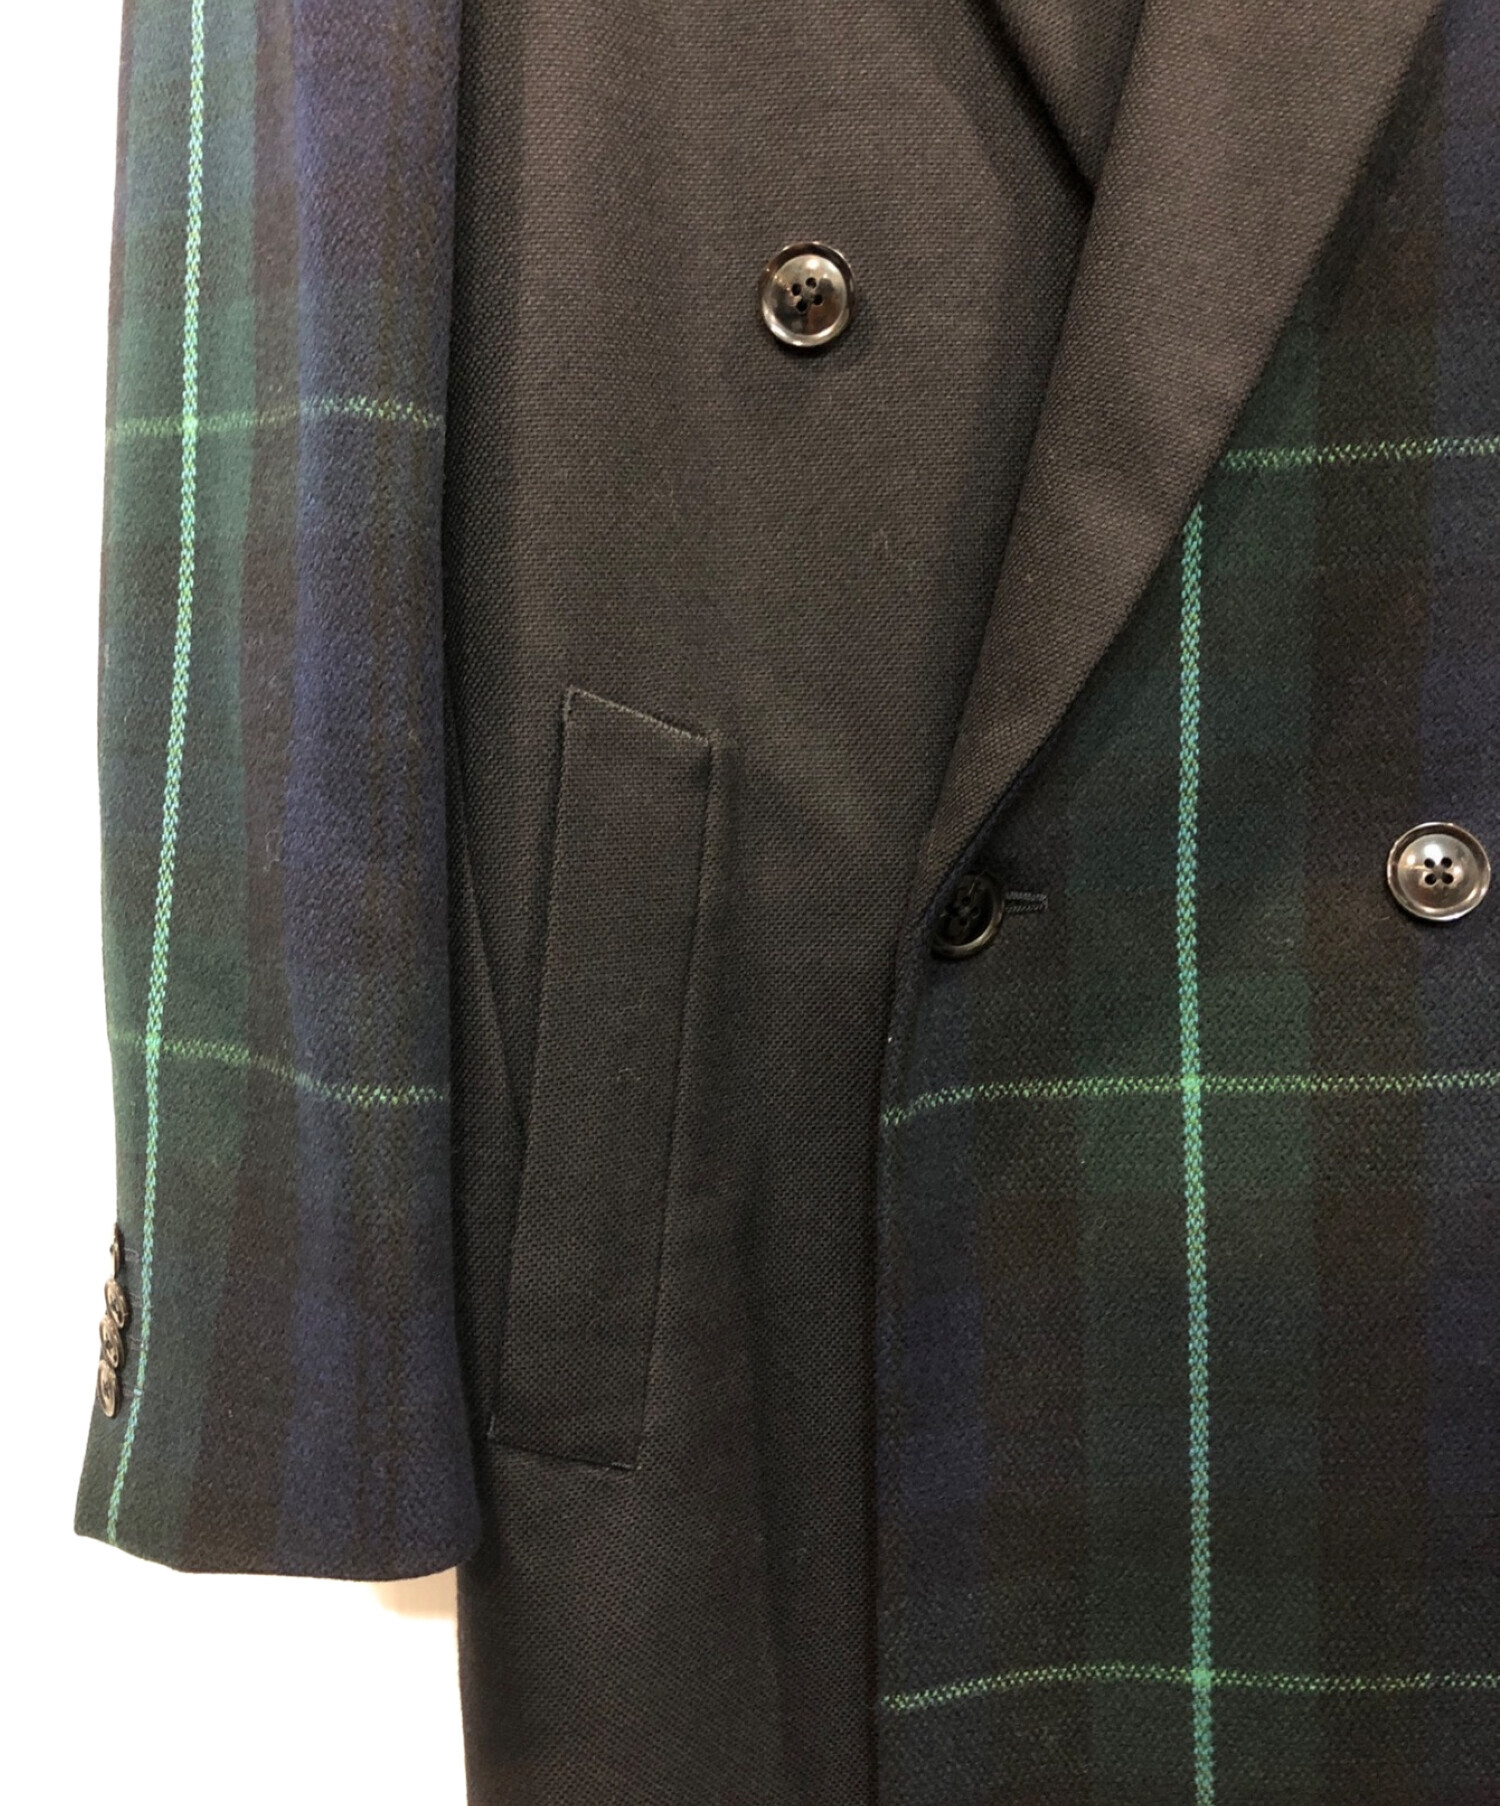 Paul Smith (ポールスミス) DREAMER BLACK WATCH MIX UP DOUBLE-BREASTED COAT グリーン  サイズ:S